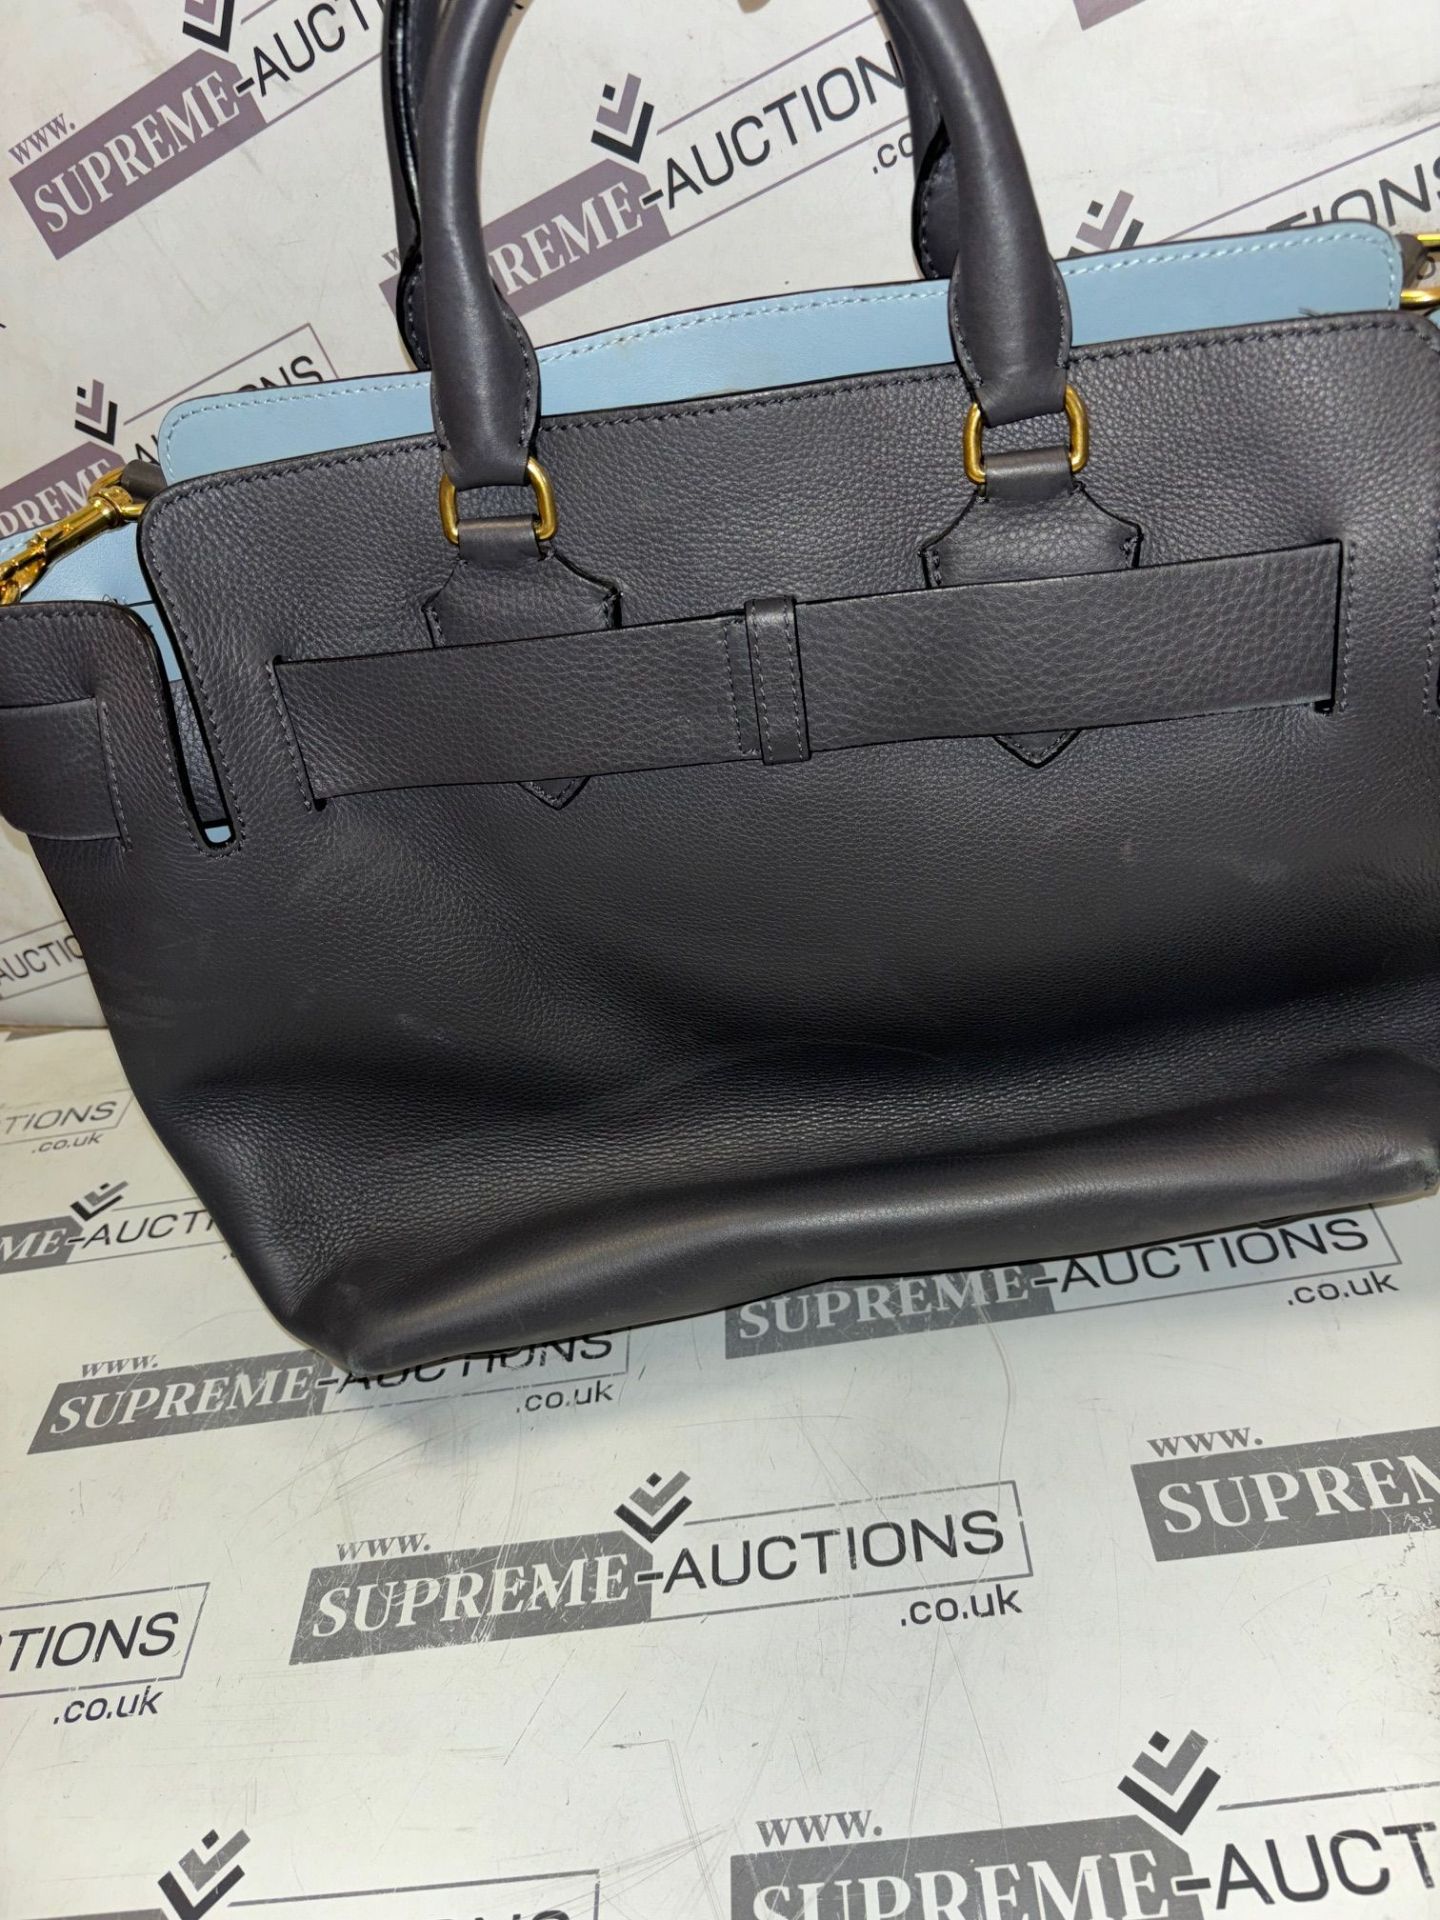 Genuine Burberry The Medium leather Belt Bag. Charcoal grey and baby blue. - Image 8 of 13